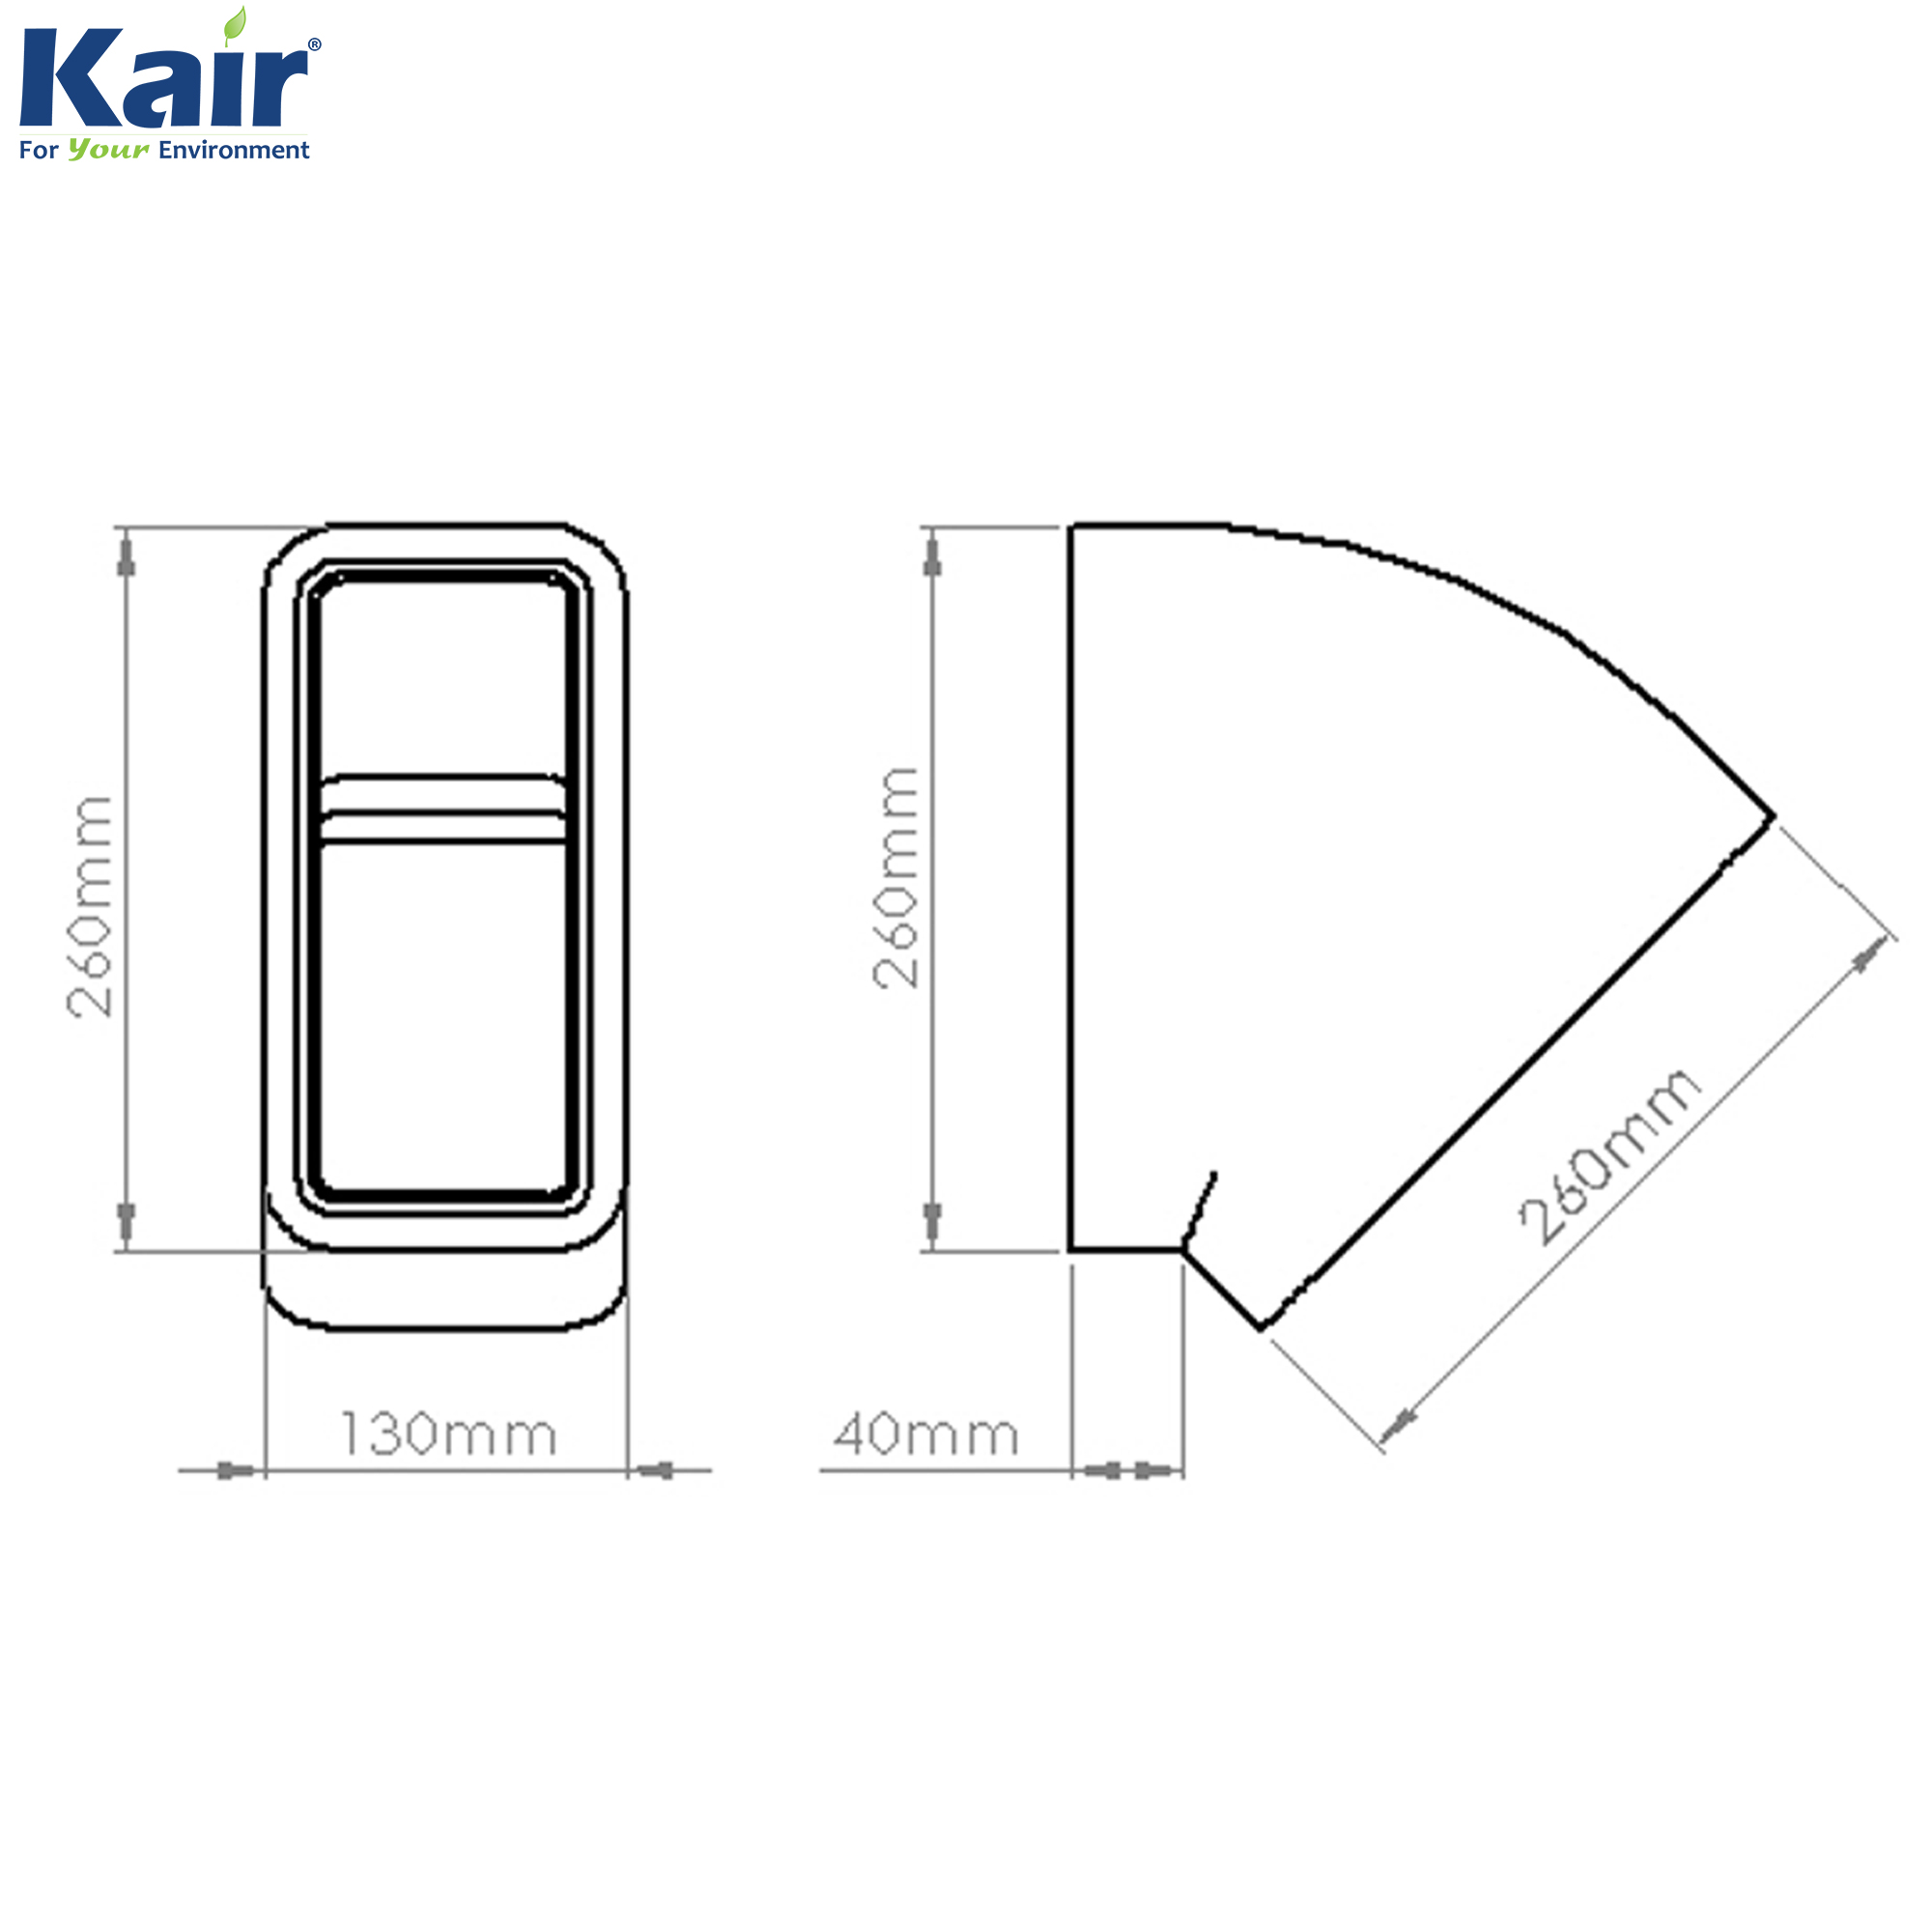 Kair Self-Seal Thermal Ducting 220X90mm Horizontal 45 Degree Bend Complete With Female Click And Lock Fittings